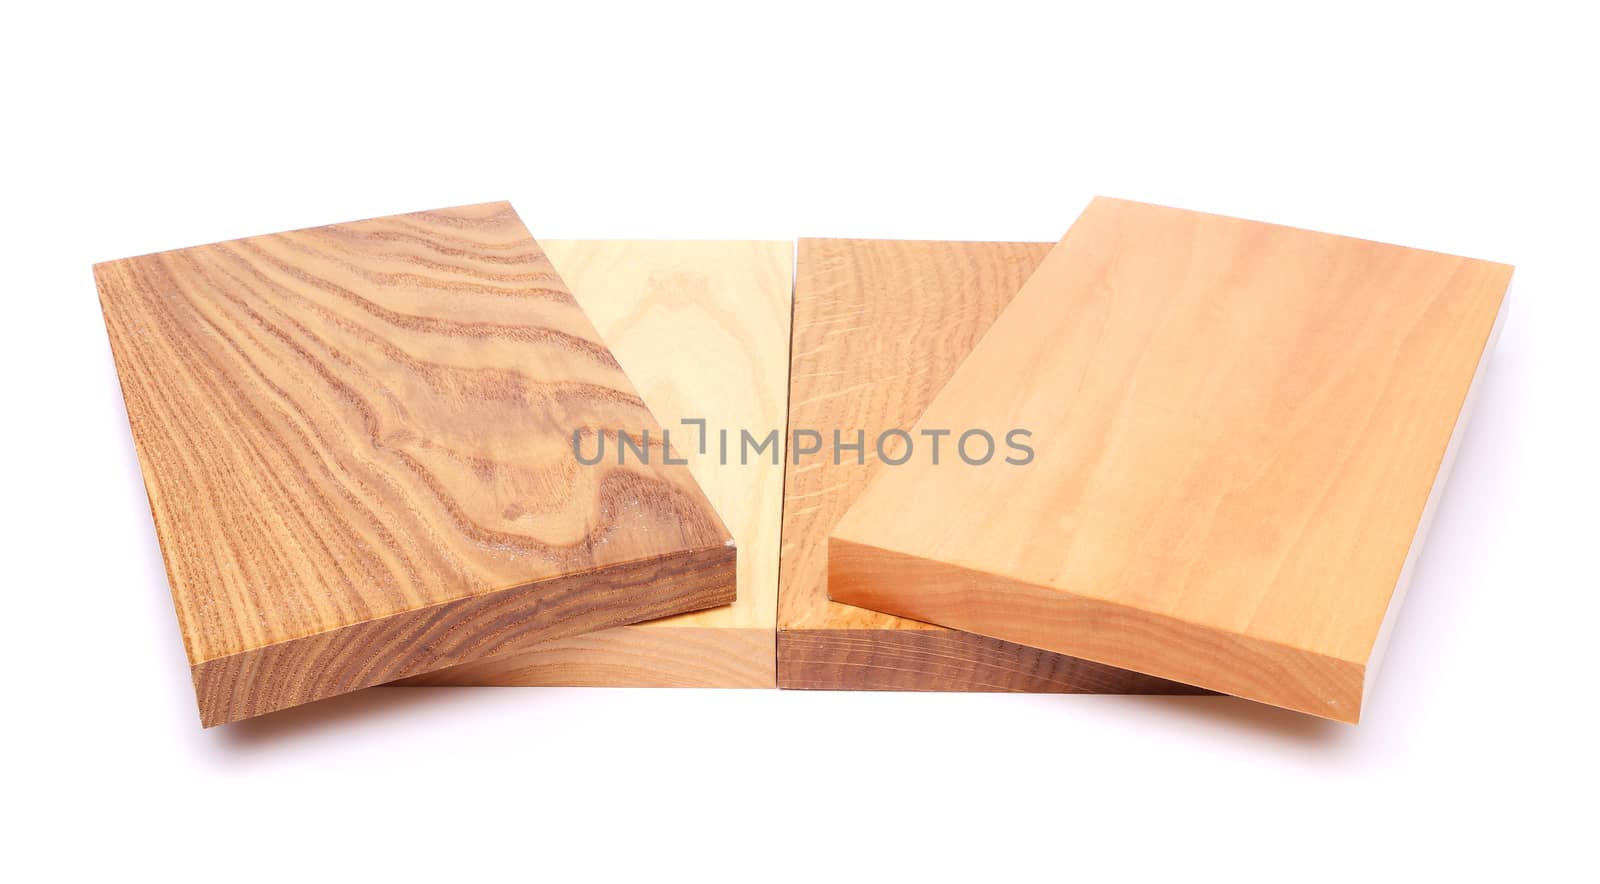 Four wooden plank close-up by indigolotos